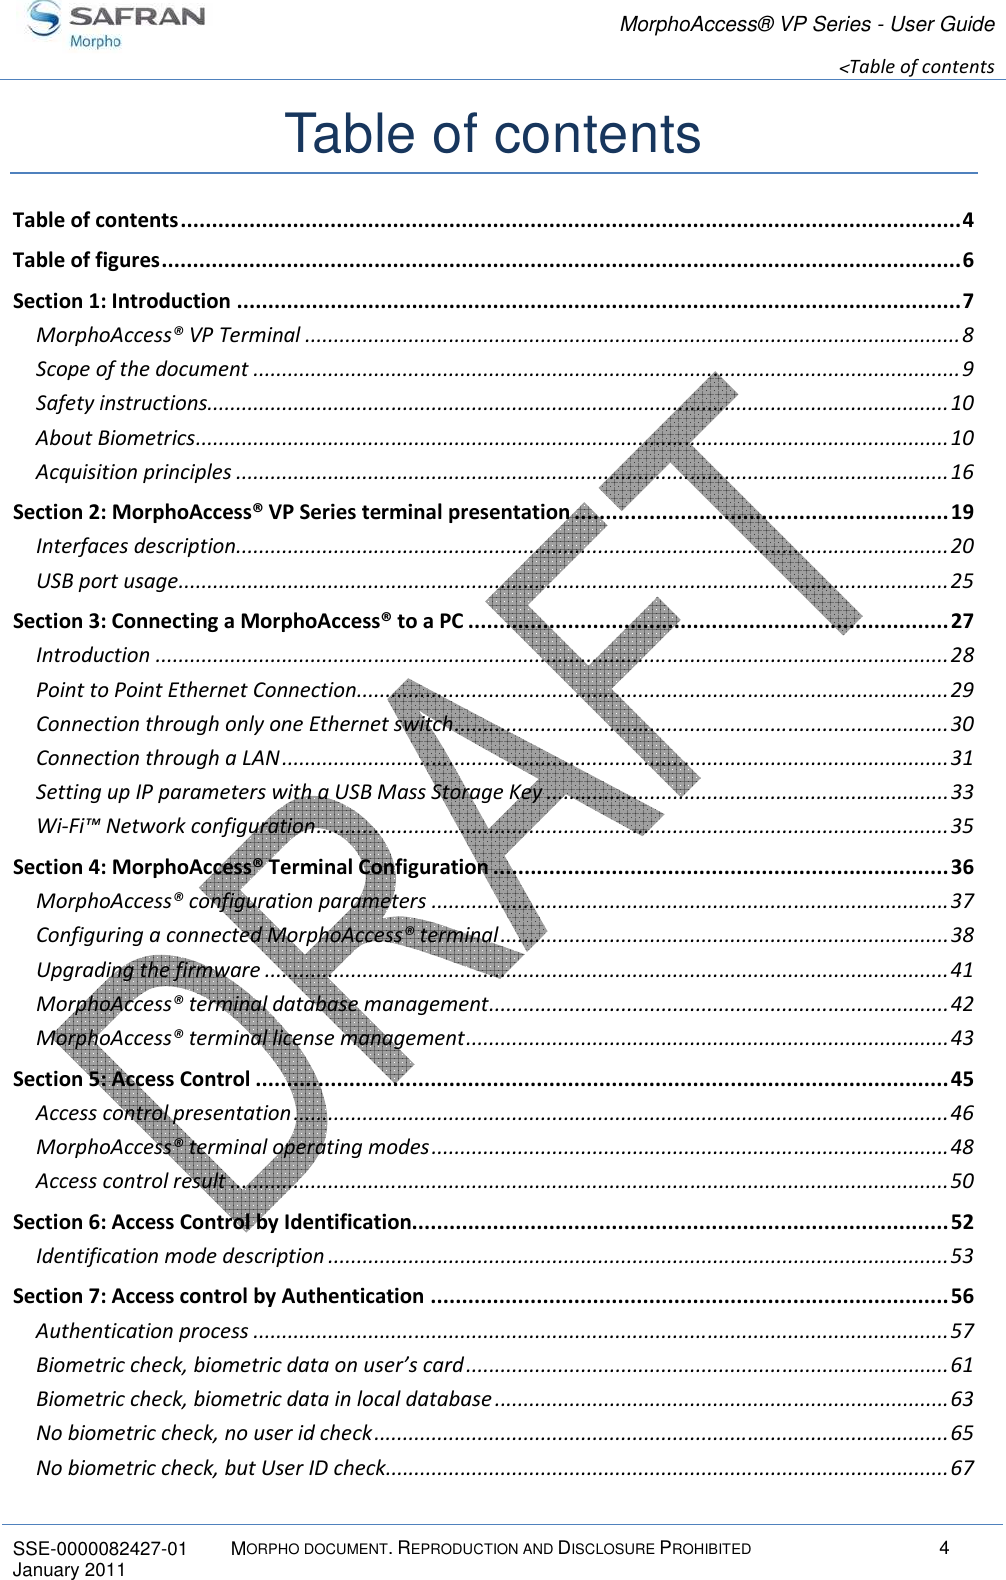 MorphoAccess® VP Series - User Guide  &lt;Table of contents       SSE-0000082427-01  MORPHO DOCUMENT. REPRODUCTION AND DISCLOSURE PROHIBITED  4 January 2011      Table of contents Table of contents ............................................................................................................................. 4 Table of figures ................................................................................................................................ 6 Section 1: Introduction .................................................................................................................... 7 MorphoAccess® VP Terminal .................................................................................................................. 8 Scope of the document ........................................................................................................................... 9 Safety instructions................................................................................................................................. 10 About Biometrics ................................................................................................................................... 10 Acquisition principles ............................................................................................................................ 16 Section 2: MorphoAccess® VP Series terminal presentation ............................................................ 19 Interfaces description ............................................................................................................................ 20 USB port usage ...................................................................................................................................... 25 Section 3: Connecting a MorphoAccess® to a PC ............................................................................. 27 Introduction .......................................................................................................................................... 28 Point to Point Ethernet Connection....................................................................................................... 29 Connection through only one Ethernet switch ...................................................................................... 30 Connection through a LAN .................................................................................................................... 31 Setting up IP parameters with a USB Mass Storage Key ...................................................................... 33 Wi-Fi™ Network configuration .............................................................................................................. 35 Section 4: MorphoAccess® Terminal Configuration ......................................................................... 36 MorphoAccess® configuration parameters .......................................................................................... 37 Configuring a connected MorphoAccess® terminal .............................................................................. 38 Upgrading the firmware ....................................................................................................................... 41 MorphoAccess® terminal database management ................................................................................ 42 MorphoAccess® terminal license management .................................................................................... 43 Section 5: Access Control ............................................................................................................... 45 Access control presentation .................................................................................................................. 46 MorphoAccess® terminal operating modes .......................................................................................... 48 Access control result ............................................................................................................................. 50 Section 6: Access Control by Identification...................................................................................... 52 Identification mode description ............................................................................................................ 53 Section 7: Access control by Authentication ................................................................................... 56 Authentication process ......................................................................................................................... 57 Biometric check, biometric data on user’s card .................................................................................... 61 Biometric check, biometric data in local database ............................................................................... 63 No biometric check, no user id check .................................................................................................... 65 No biometric check, but User ID check .................................................................................................. 67 